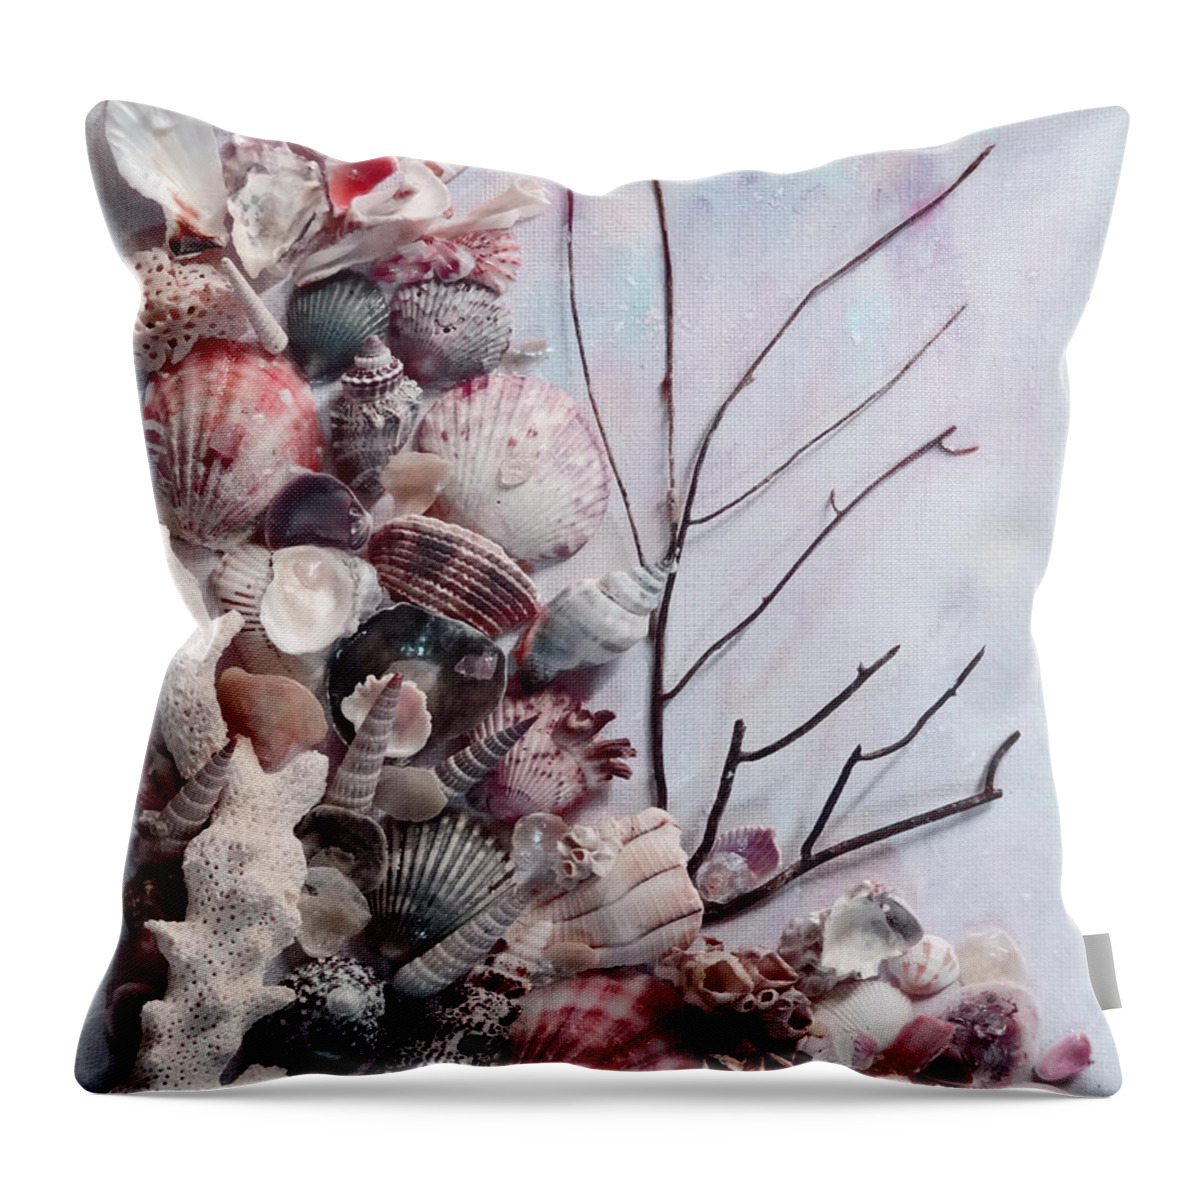  Sea Shells Throw Pillow featuring the photograph Shell Bouquet No 6 by Karin Dawn Kelshall- Best